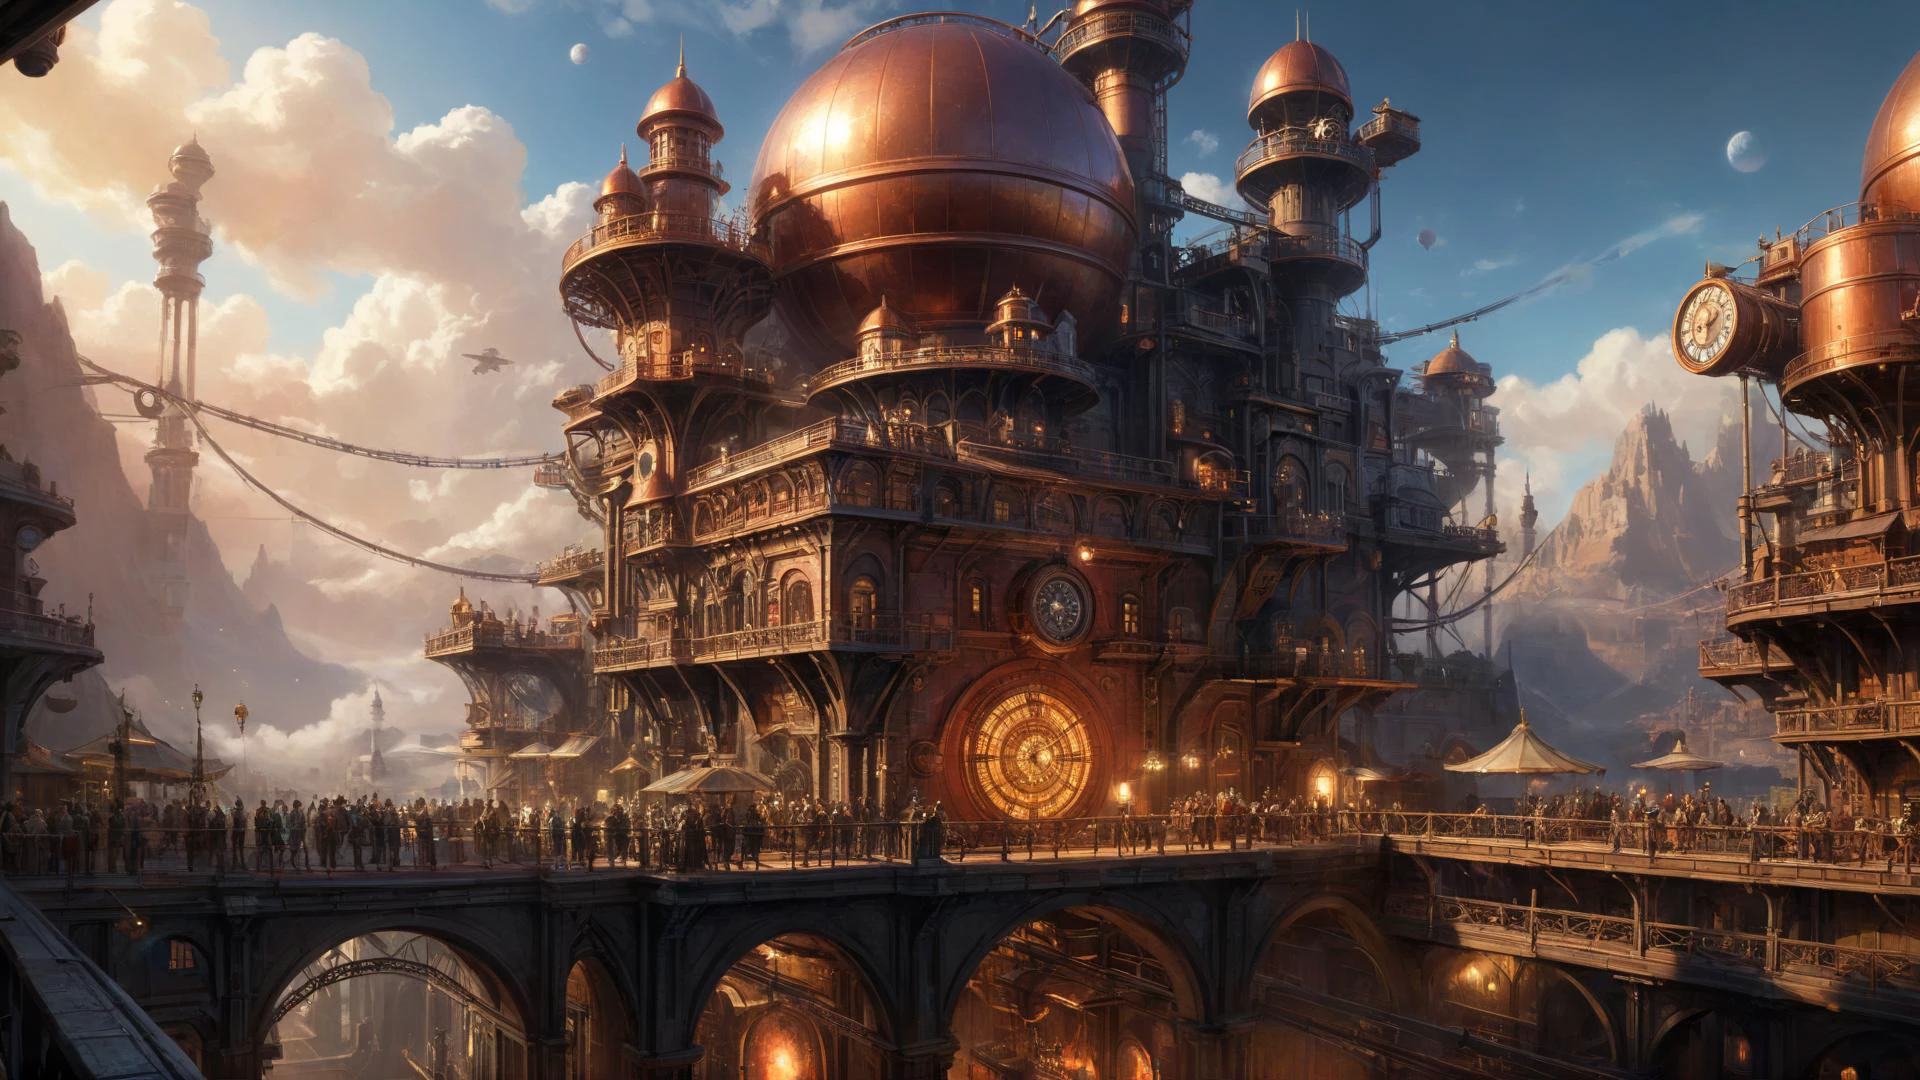 SK_DIGITALART, painting of a steampunk megastructure outside of time, an exotic distant world, by Ian McQue, 
highly impressive & realistic, Hyper-detailed, Insane Details, Intricate Details, Cinematics, Editorial Art, Tilt Blur, Super-Resolution, Megapixels, Unreal Engine 5, Studio Lighting, Volumetric, Optical, Diffusion Glowing, Shadows, Proportions, Rough, Shimmery, Ray Tracing Reflections, Glossy, Lumen Reflections, Screen Space Reflections, Diffraction Rating, Chromatic Aberration, GB Shift, Ray Tracing, Ray Tracing Ambient Occlusion Anti-Ali asing, Post-Processing, Post-Production, Cel Shading, Tone Mapping, Incredibly Detailed and Intricate, Hypermaximalist, Sleek, Hyper Realistic, Super Detailed, Dynamic Pose, Hyperrealism, HDI, 8k  dramatic lighting, dark colors, wide angle view, panorama view, dominant colors Rustic Red and Copper, 
